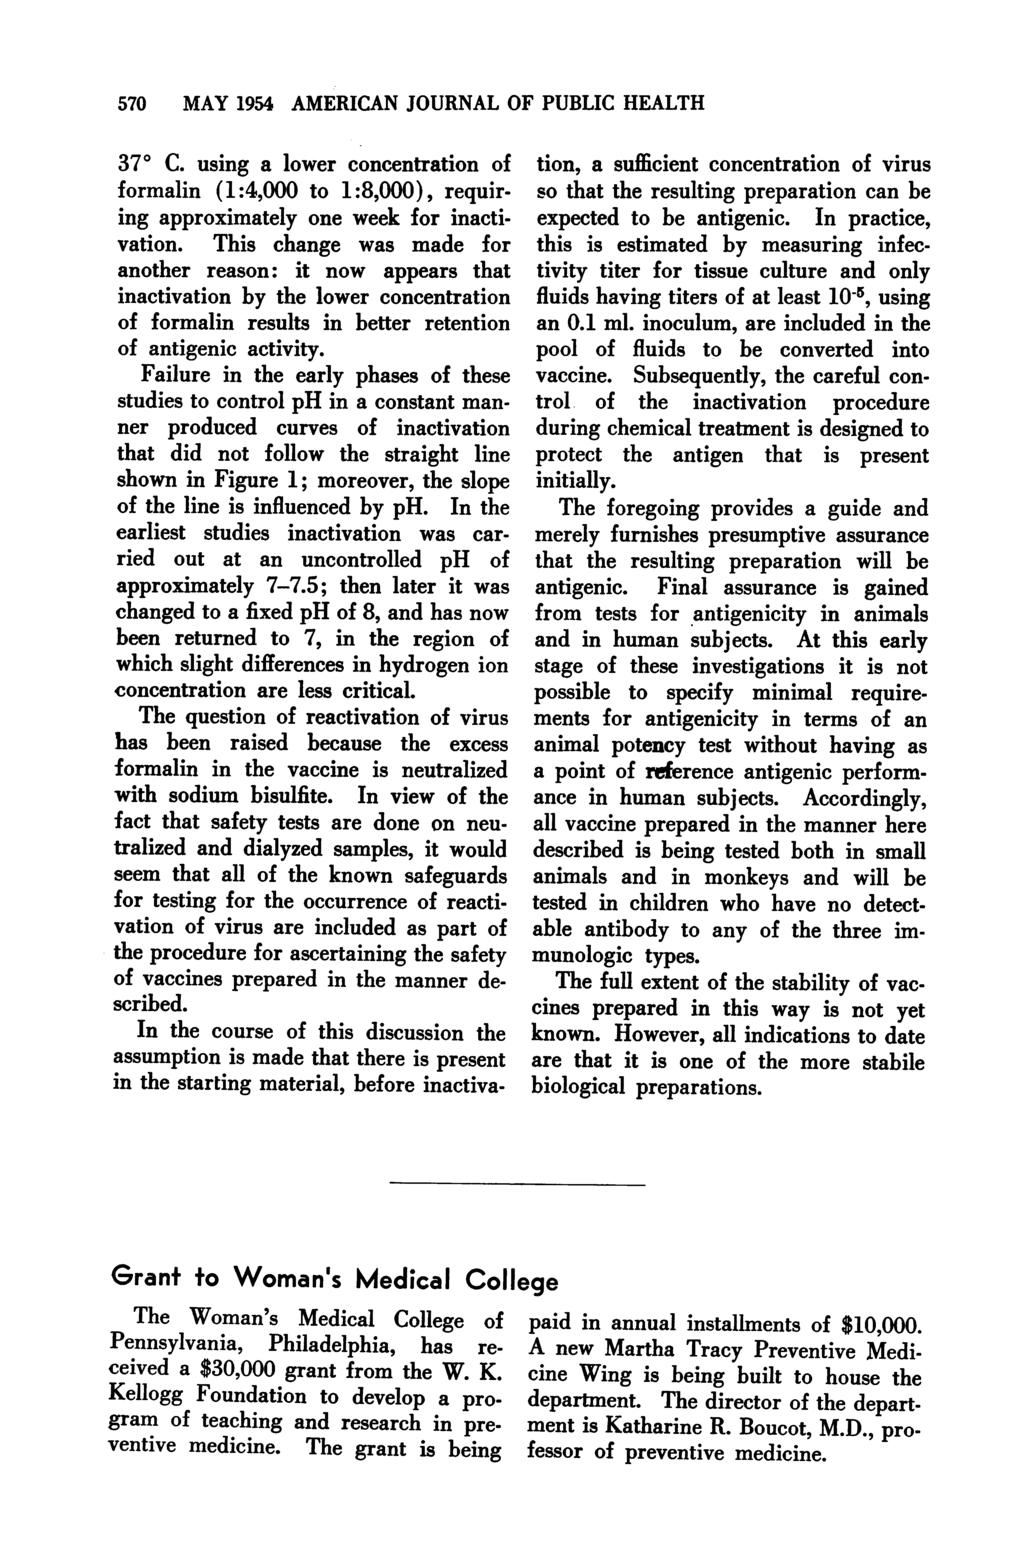 570 MAY 1954 AMERICAN JOURNAL OF PUBLIC HEALTH 370 C. using a lower concentration of formalin (1:4,000 to 1:8,000), requiring approximately one week for inactivation.